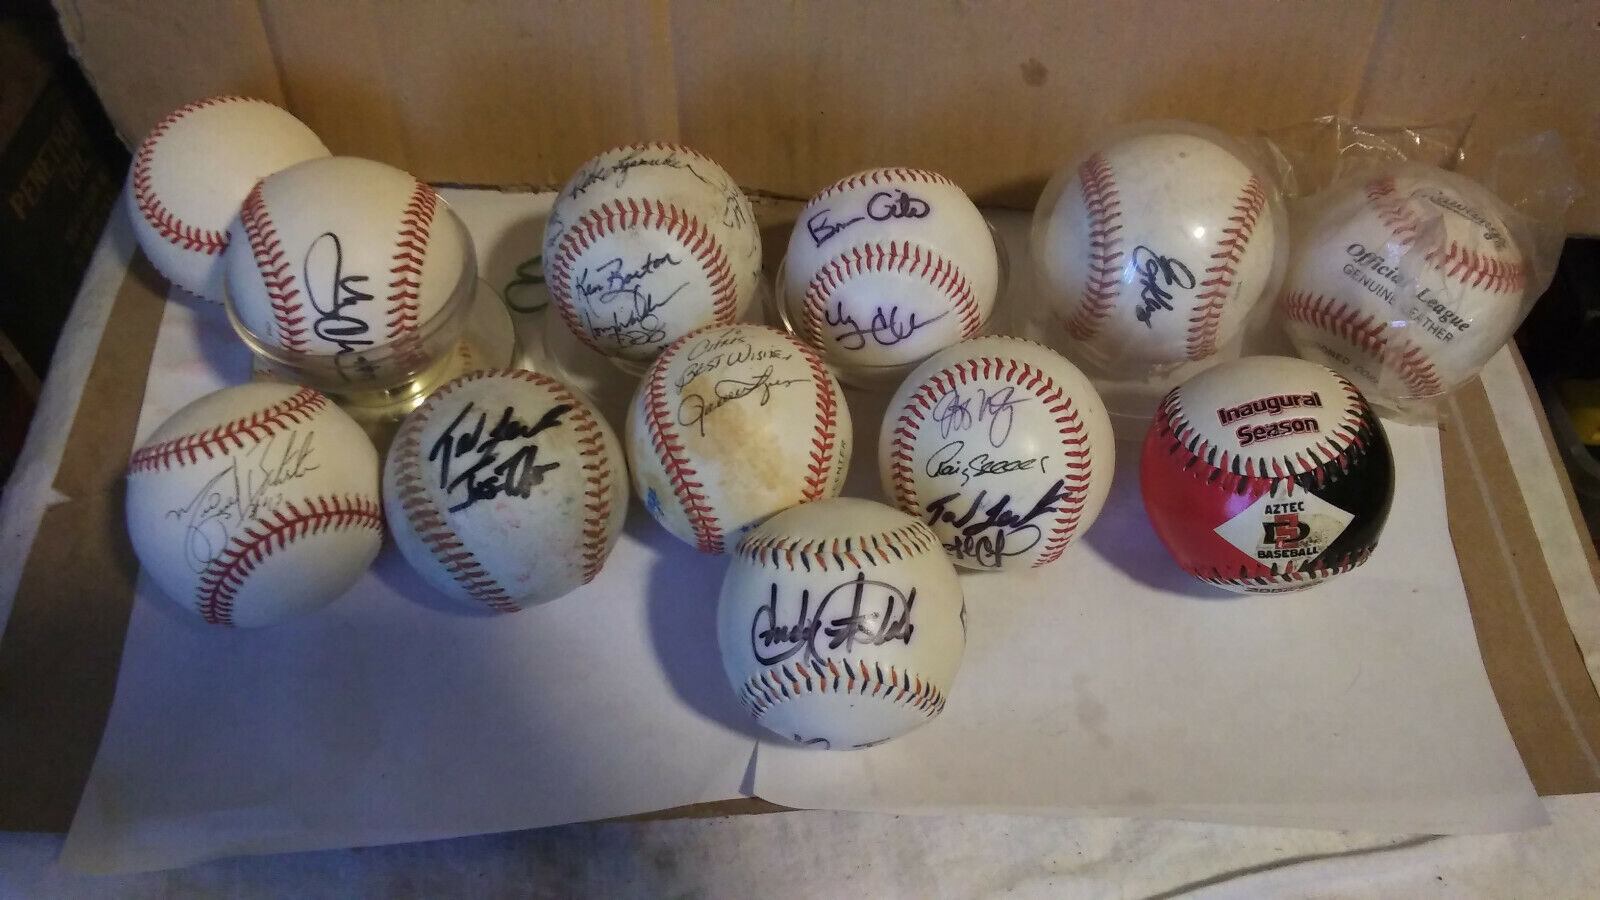 Estate Lot of 9 Signed unknown Autographed Baseballs + 1 AZTEC + 2 UNSIGNED =12 Без бренда